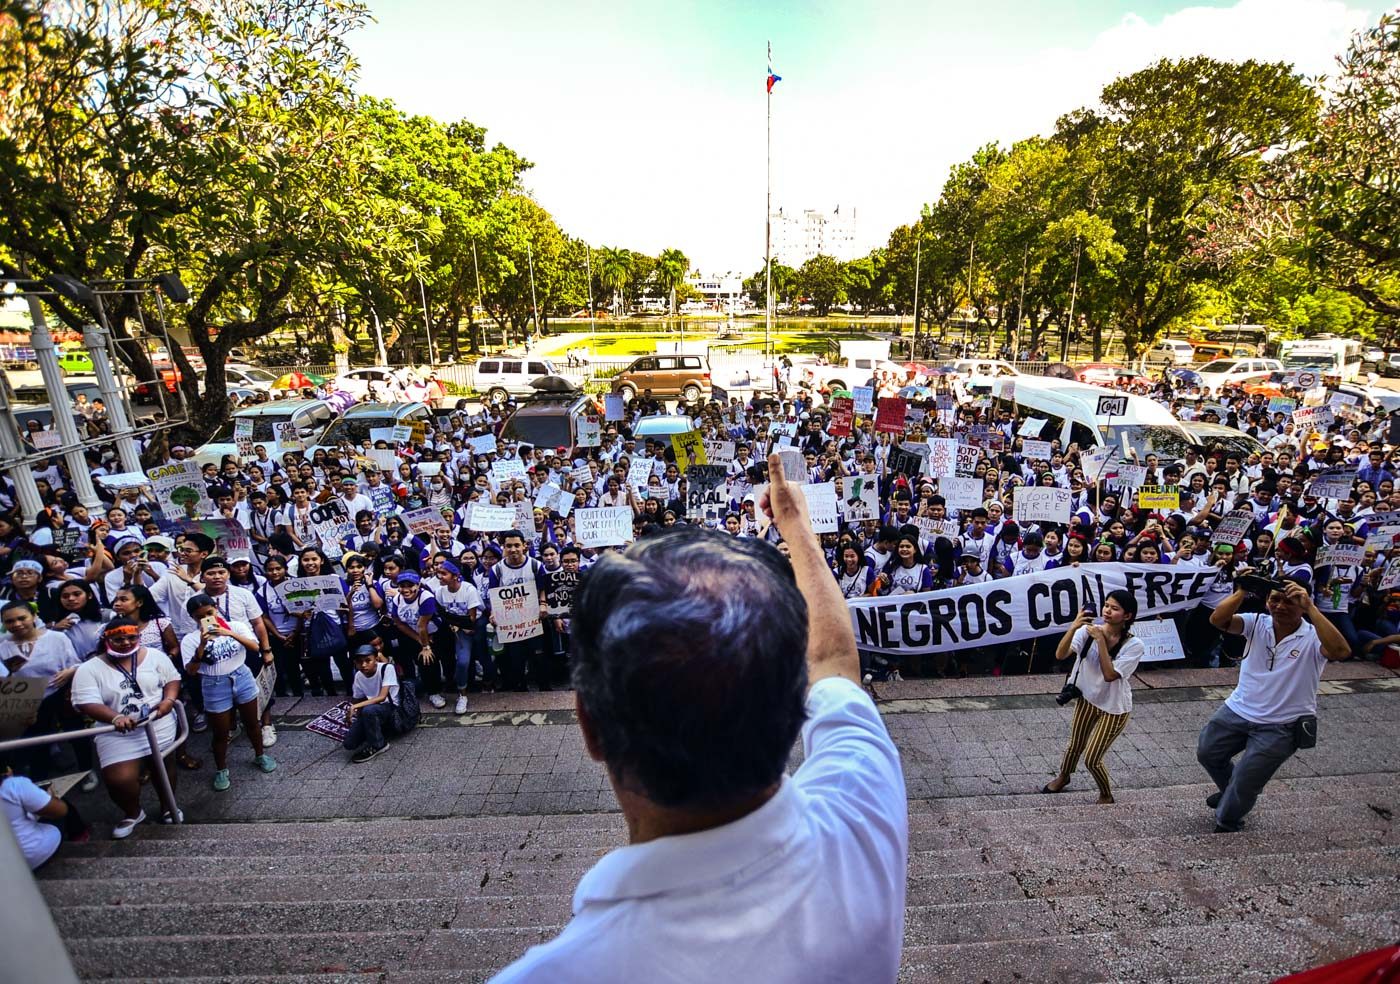 COAL-FREE. Negros Occidental Governor Alfredo Marañon Jr gives a thumbs up to the participants of the Youth Strike for Negros on March 6, 2019. Photo by Rexor Amancio/Climate Reality Philippines 